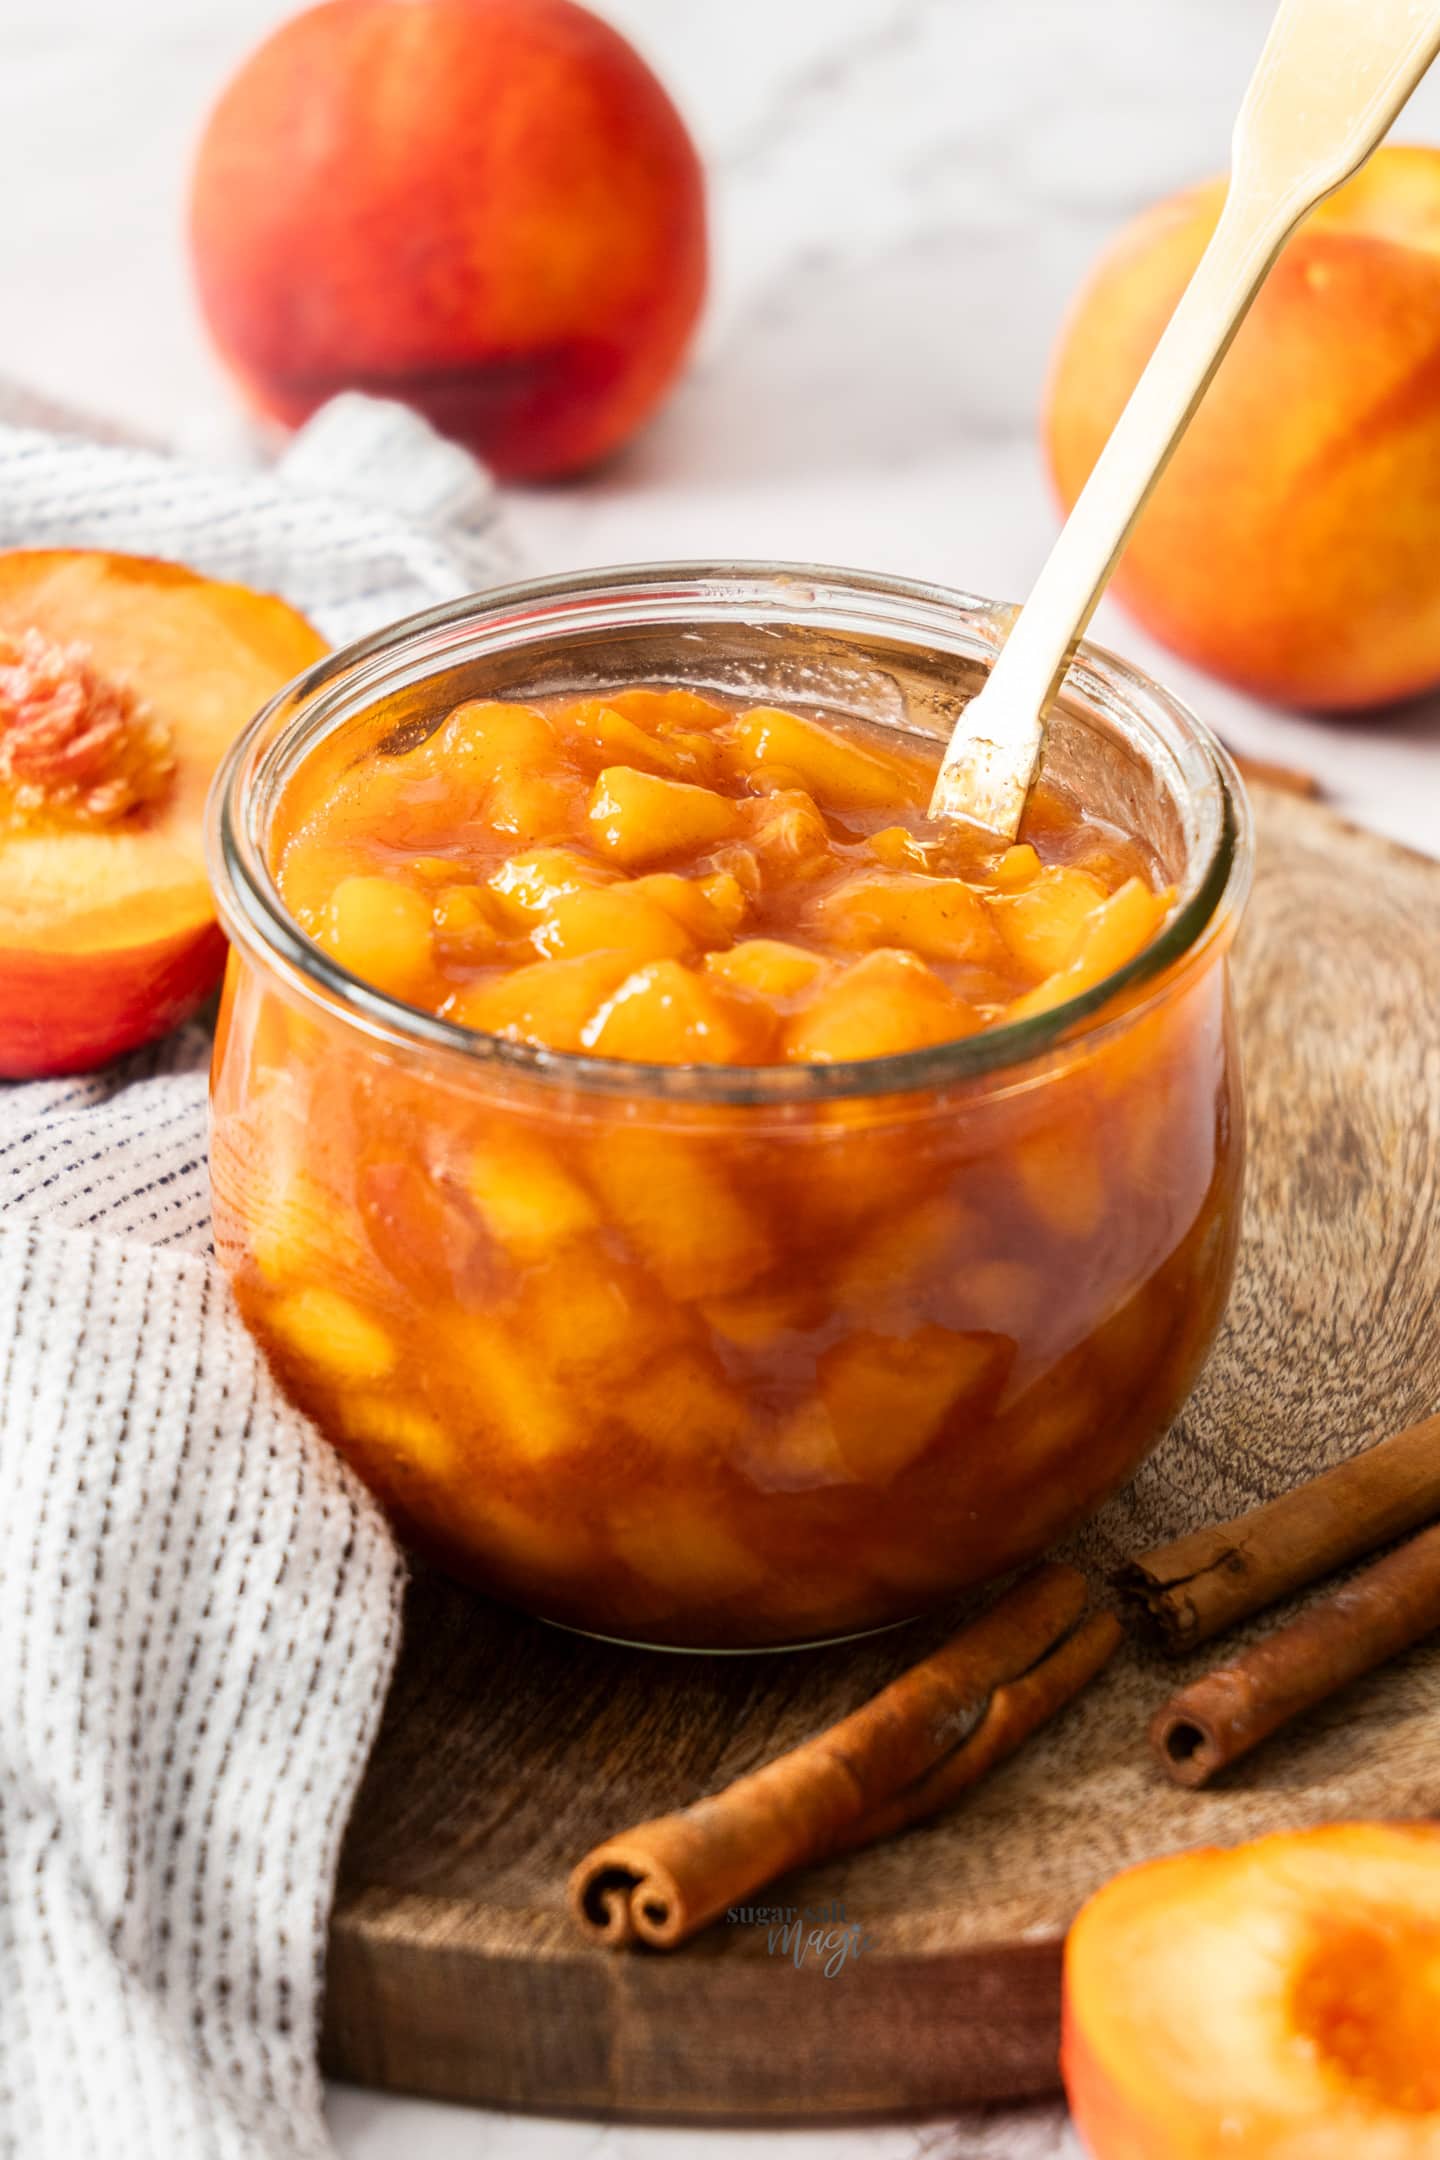 A glass jar filled with peach compote.